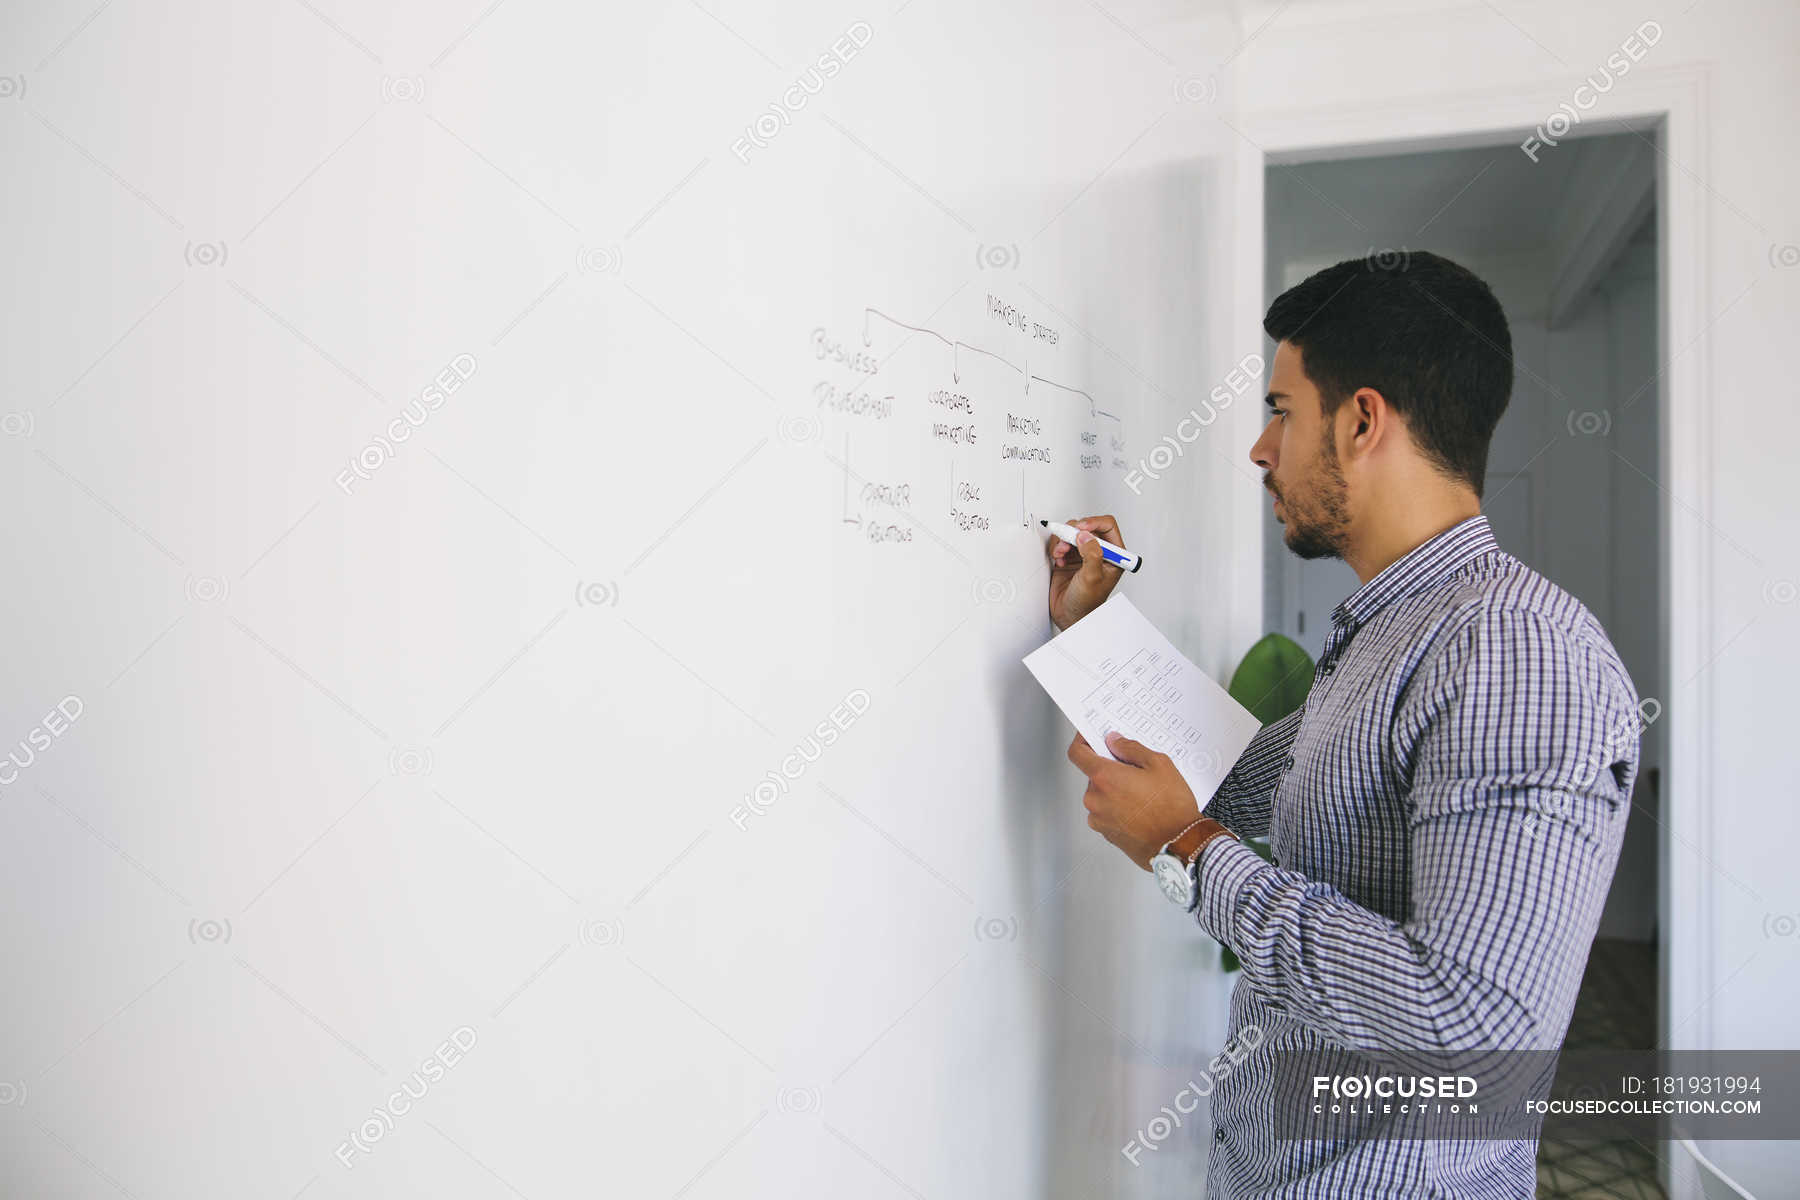 Man writing chart on wall in office — male, Presentation - Stock Photo |  #181931994